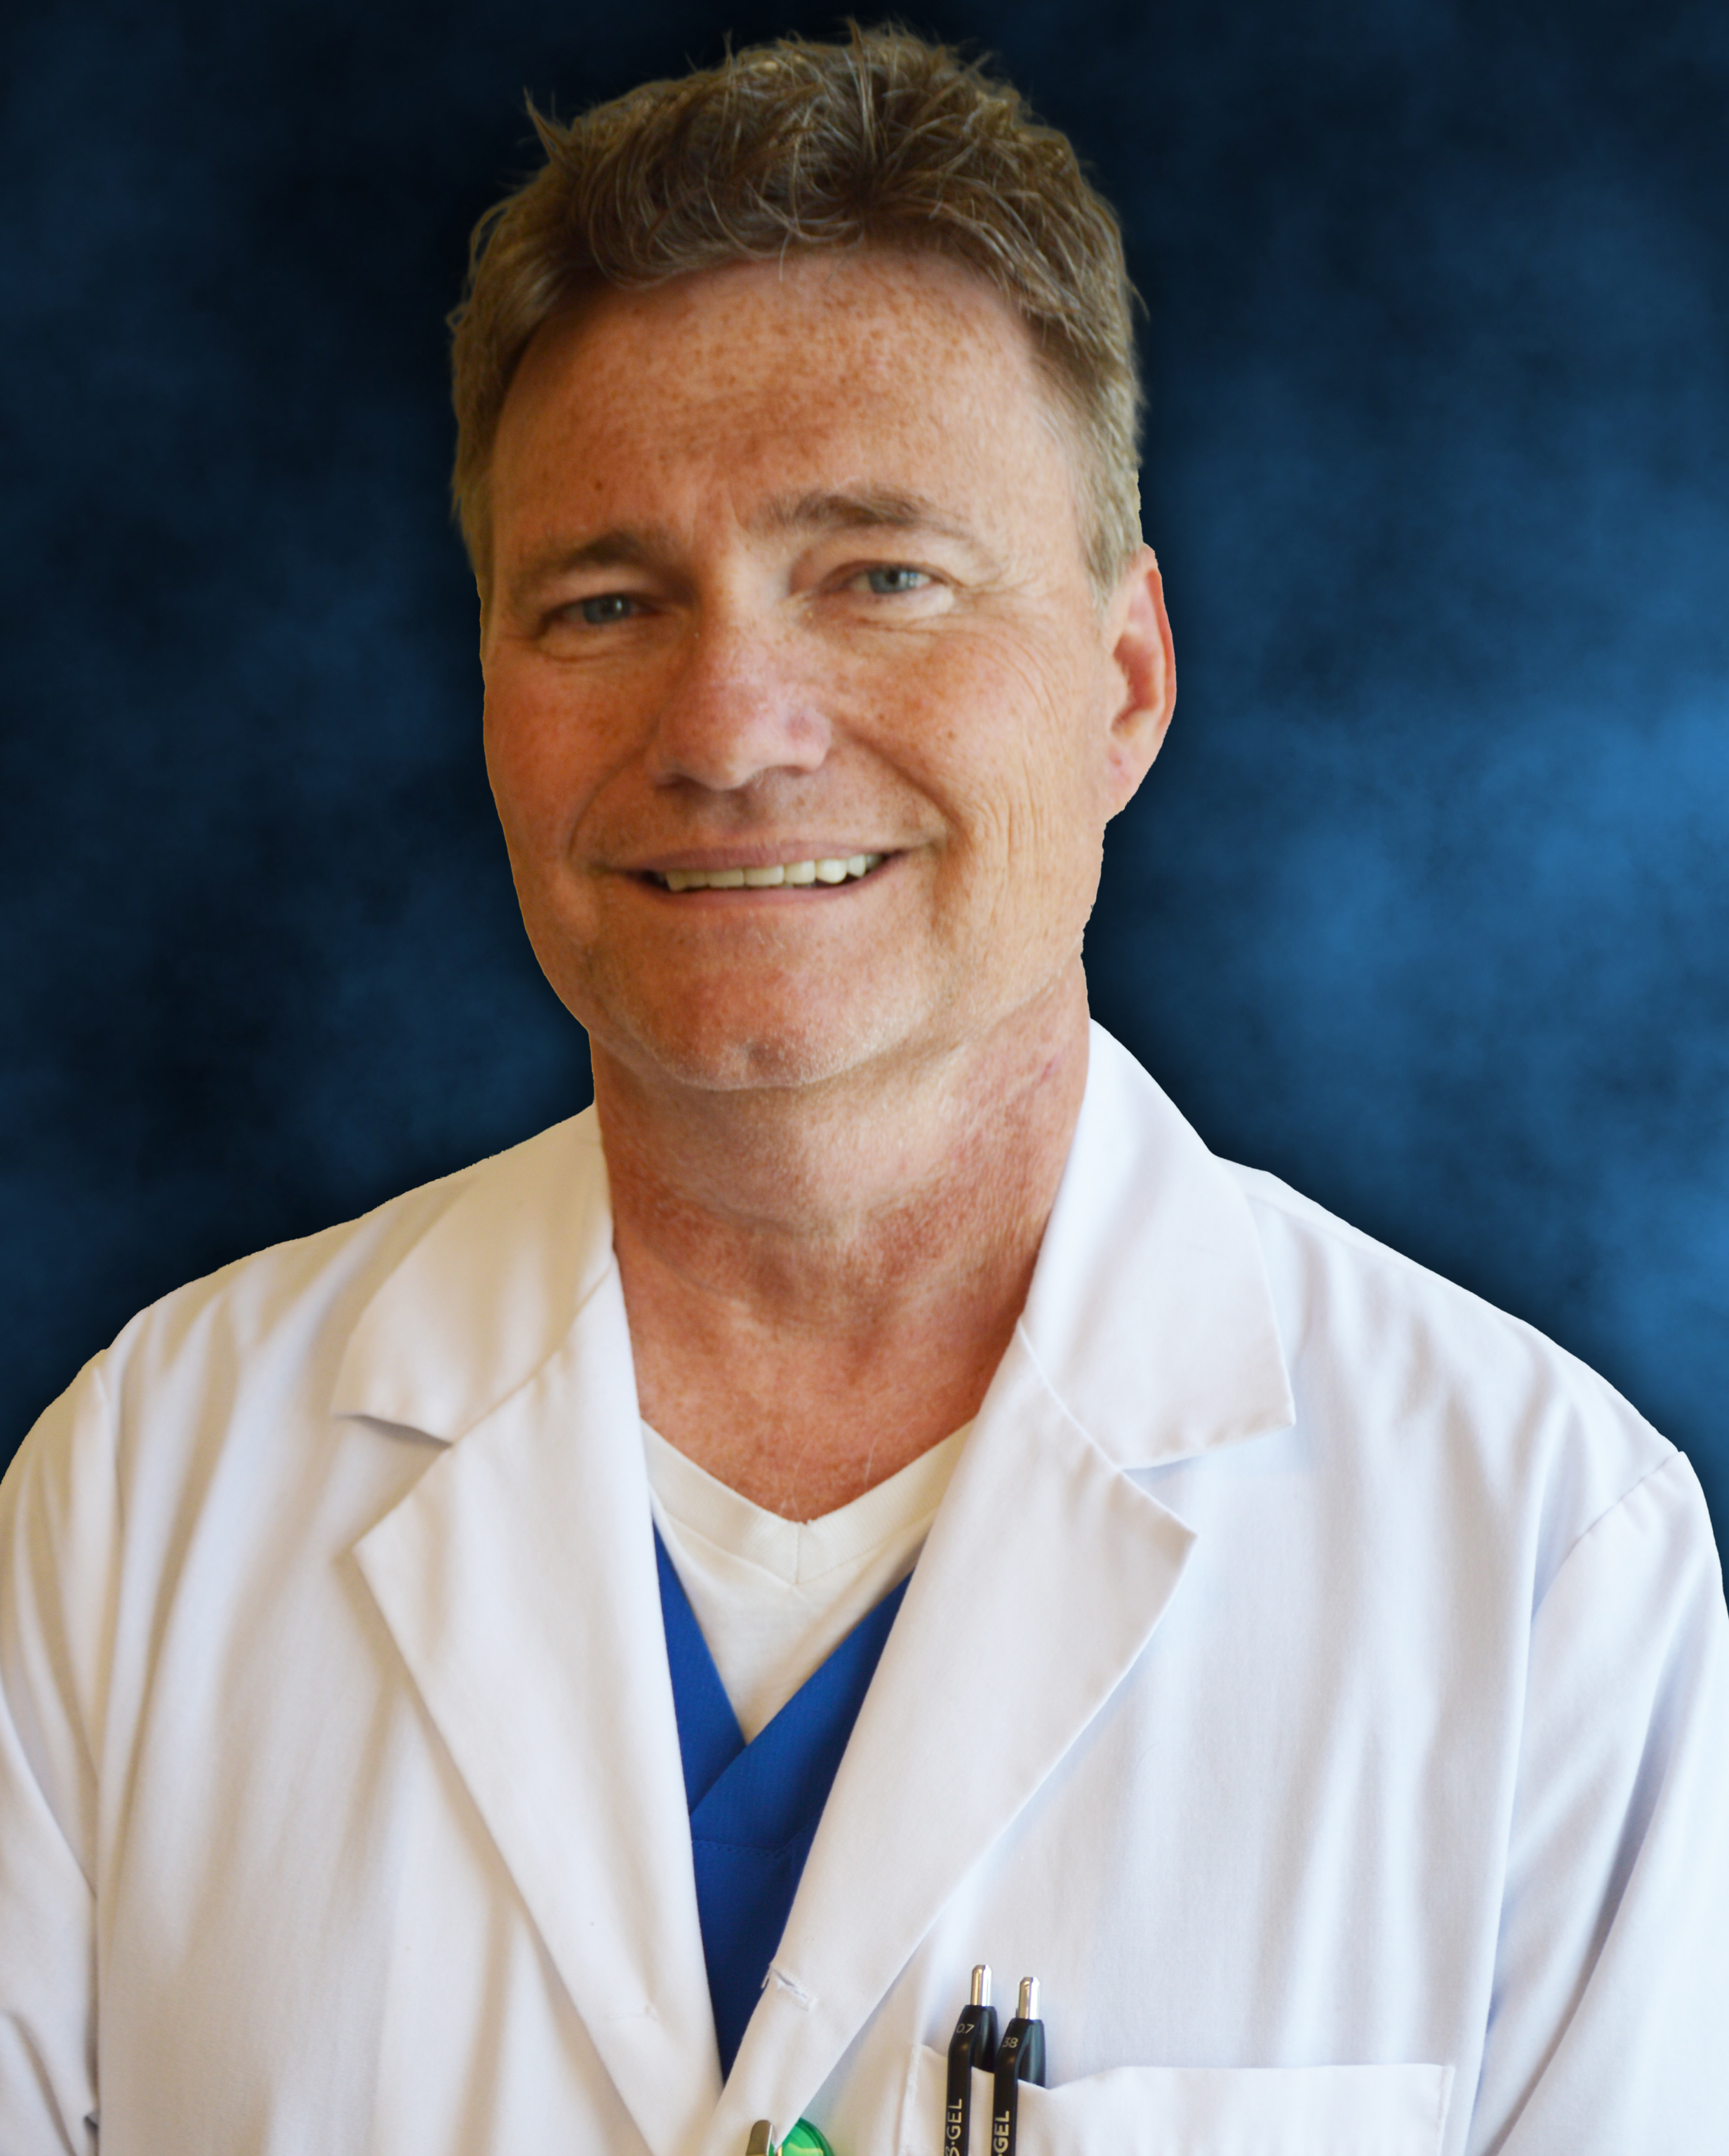 Andrew Wyant MD, Family Practice Physician